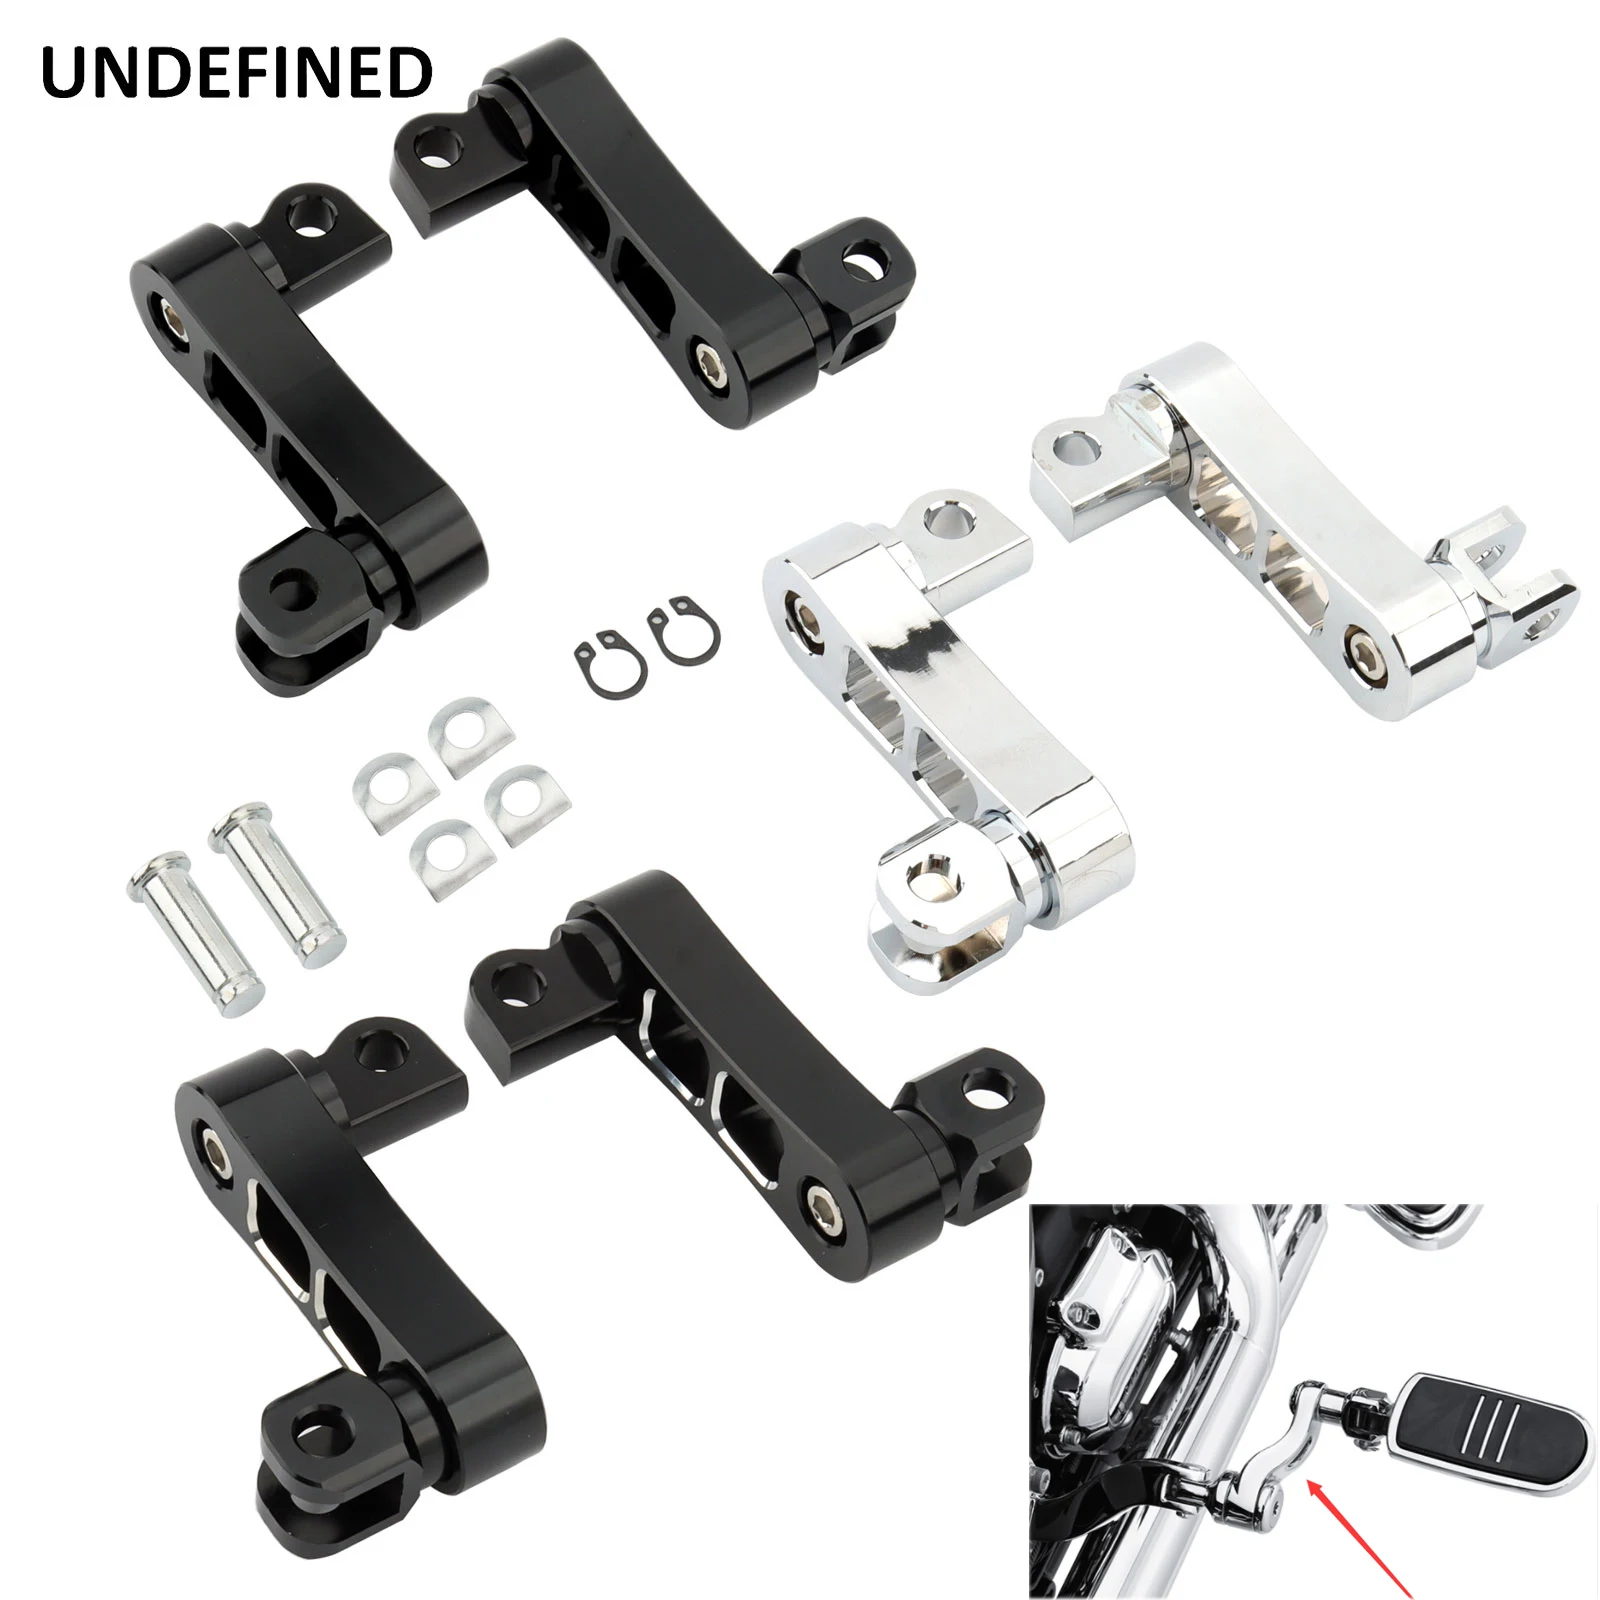 

Motorcycle Adjustable Passenger Footpegs Mount Clamp Support Extensions Bracket For Harley Touring Dyna Softail Sportster XL 883